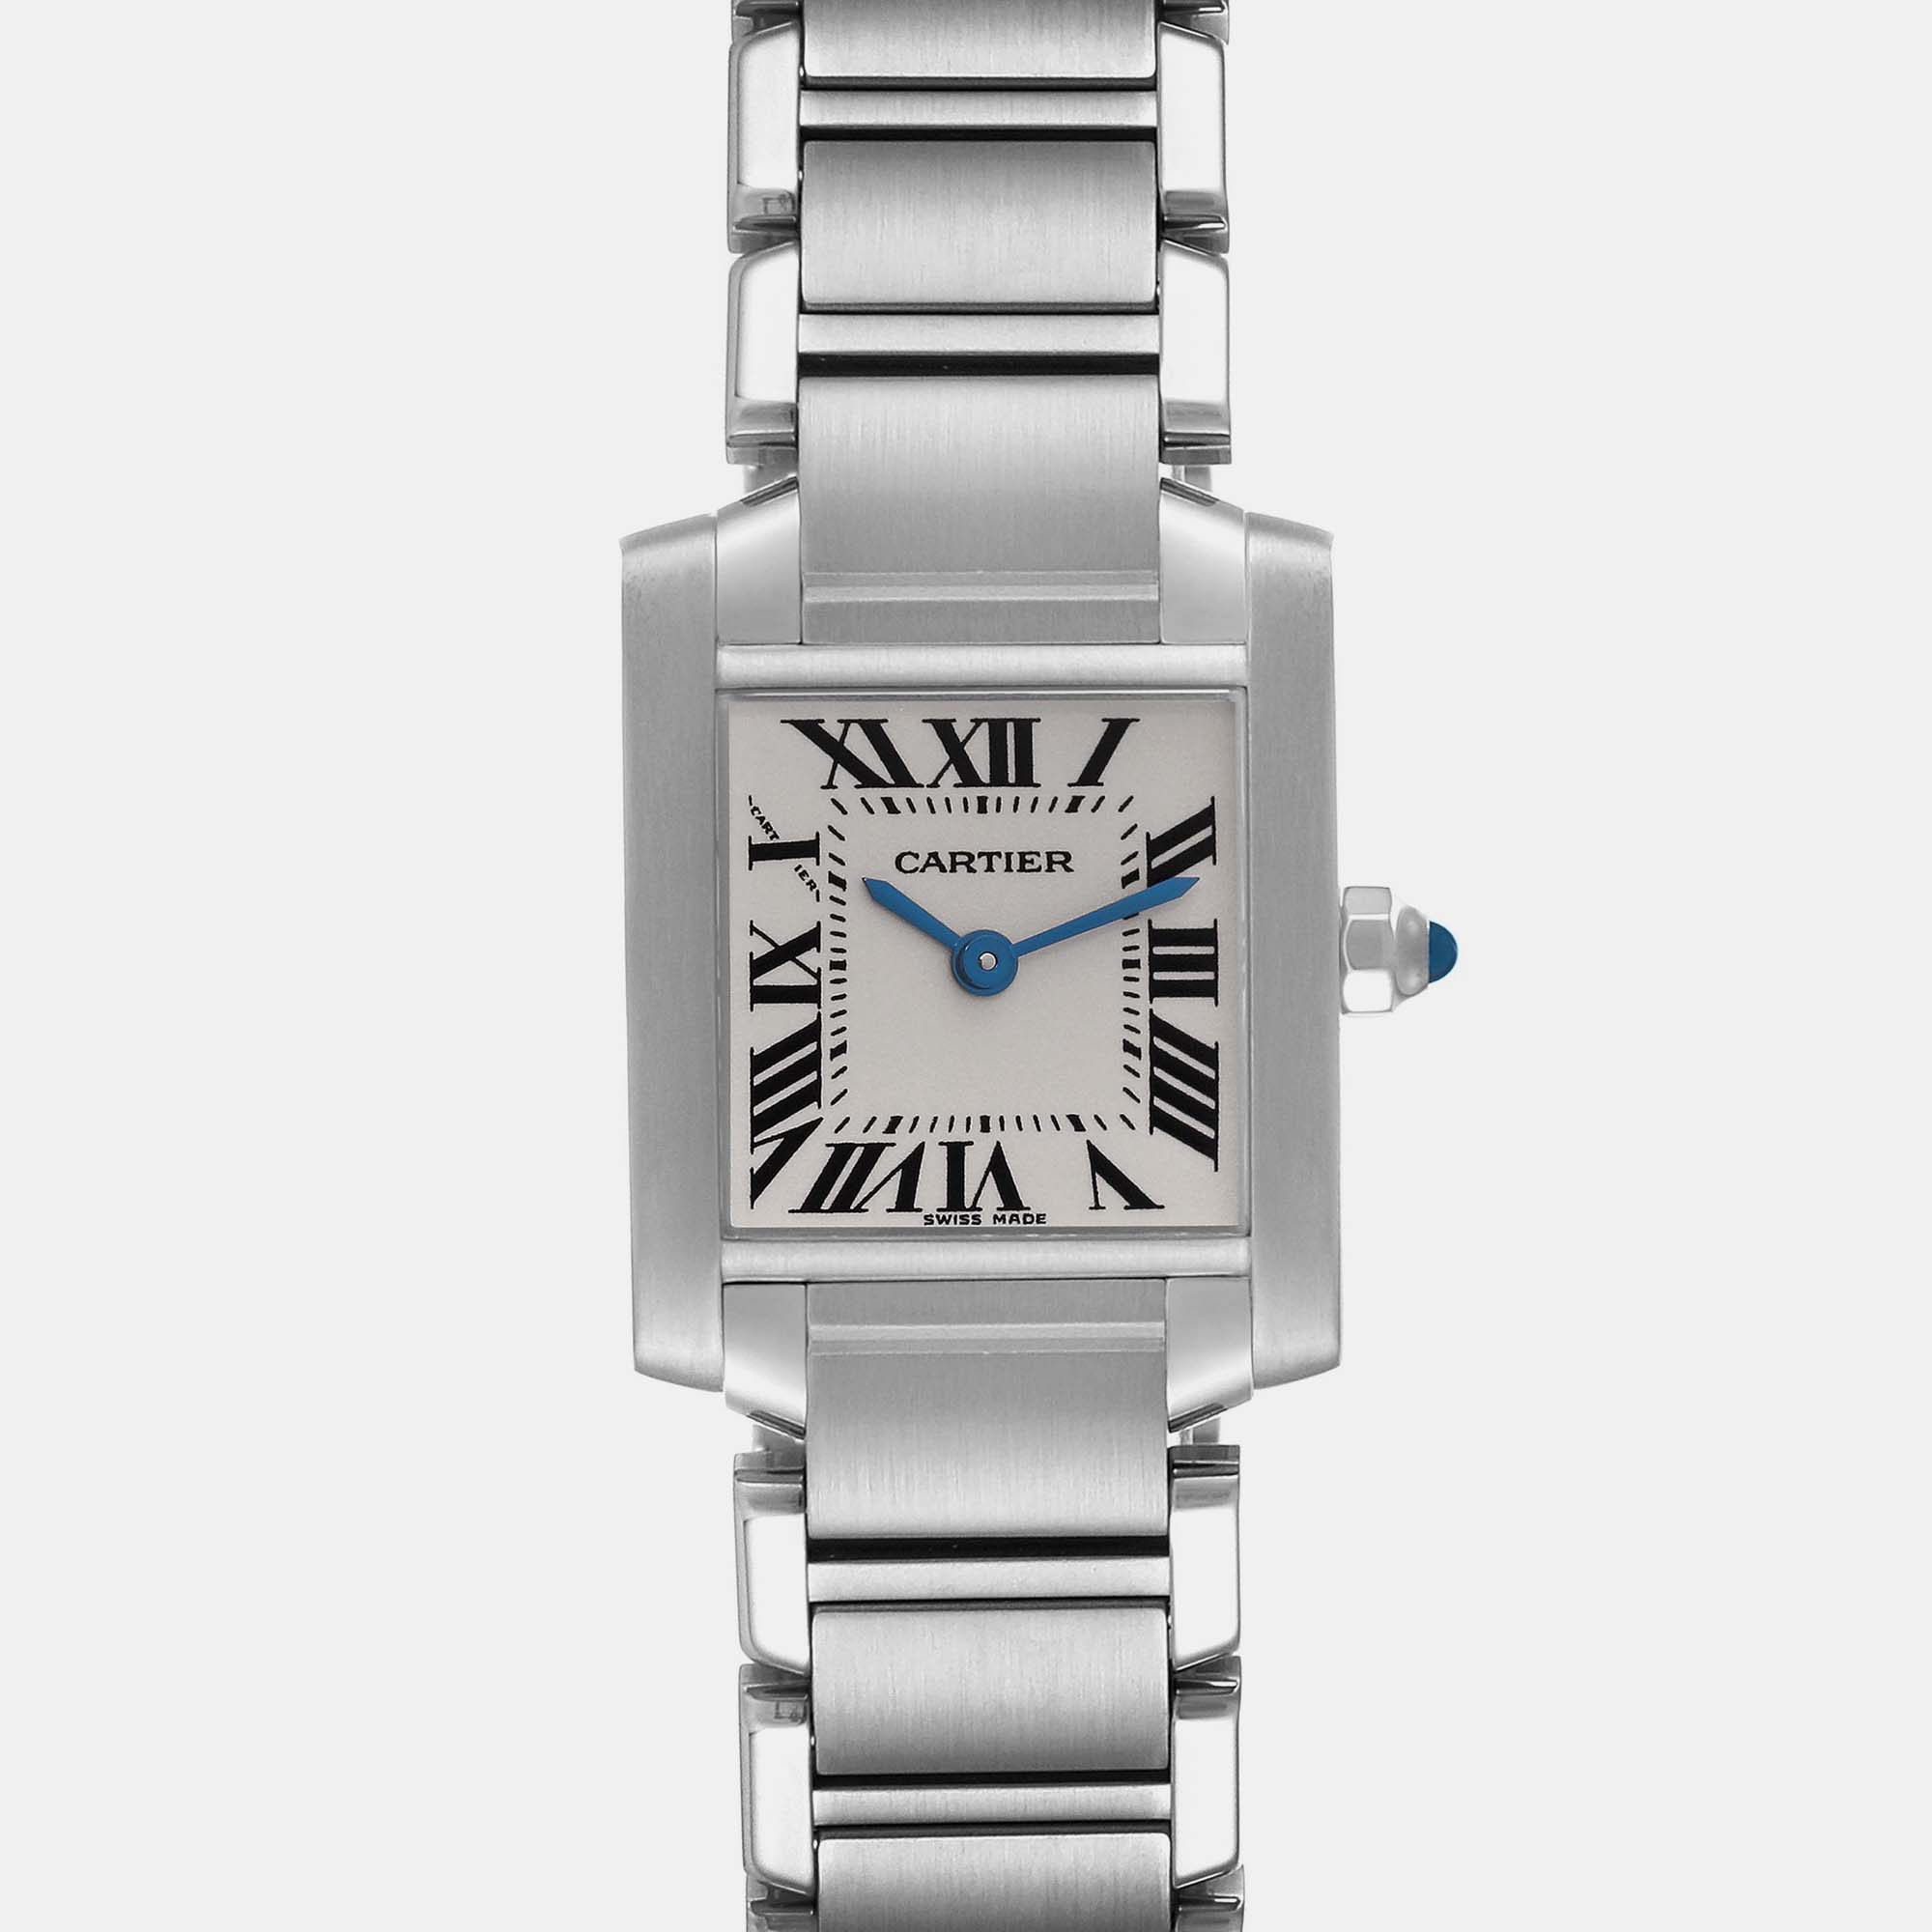 Cartier Tank Francaise Small Silver Dial Steel Ladies Watch W51008Q3 20 X 25 Mm